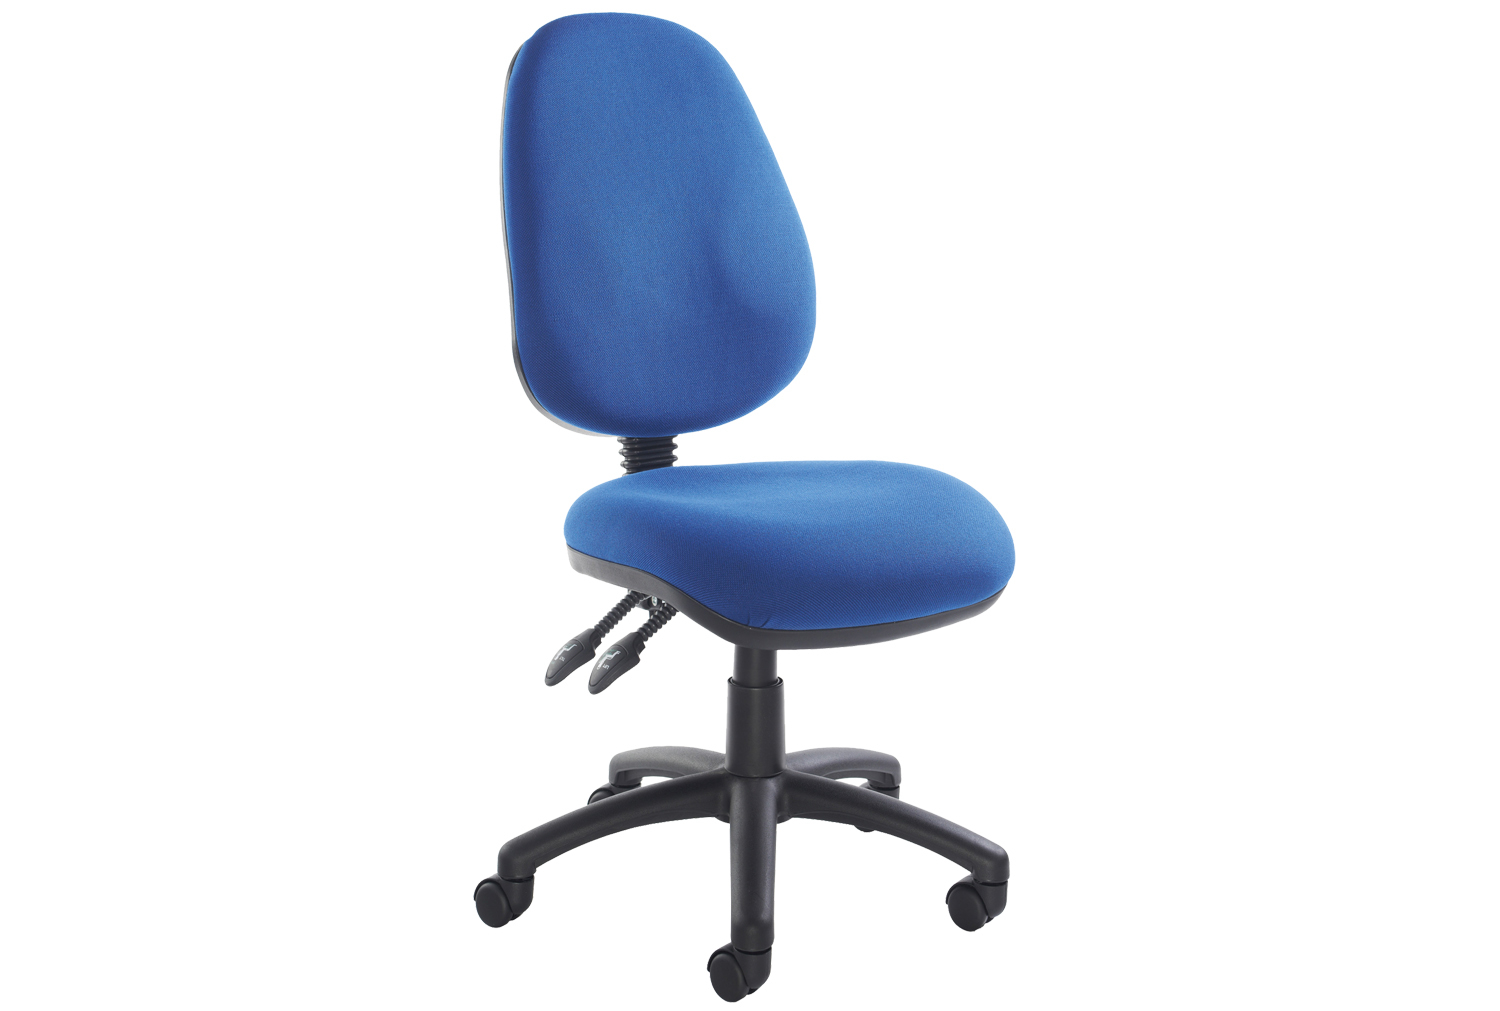 Full Lumbar 2 Lever Operator Office Chair No Arms, Blue, Fully Installed